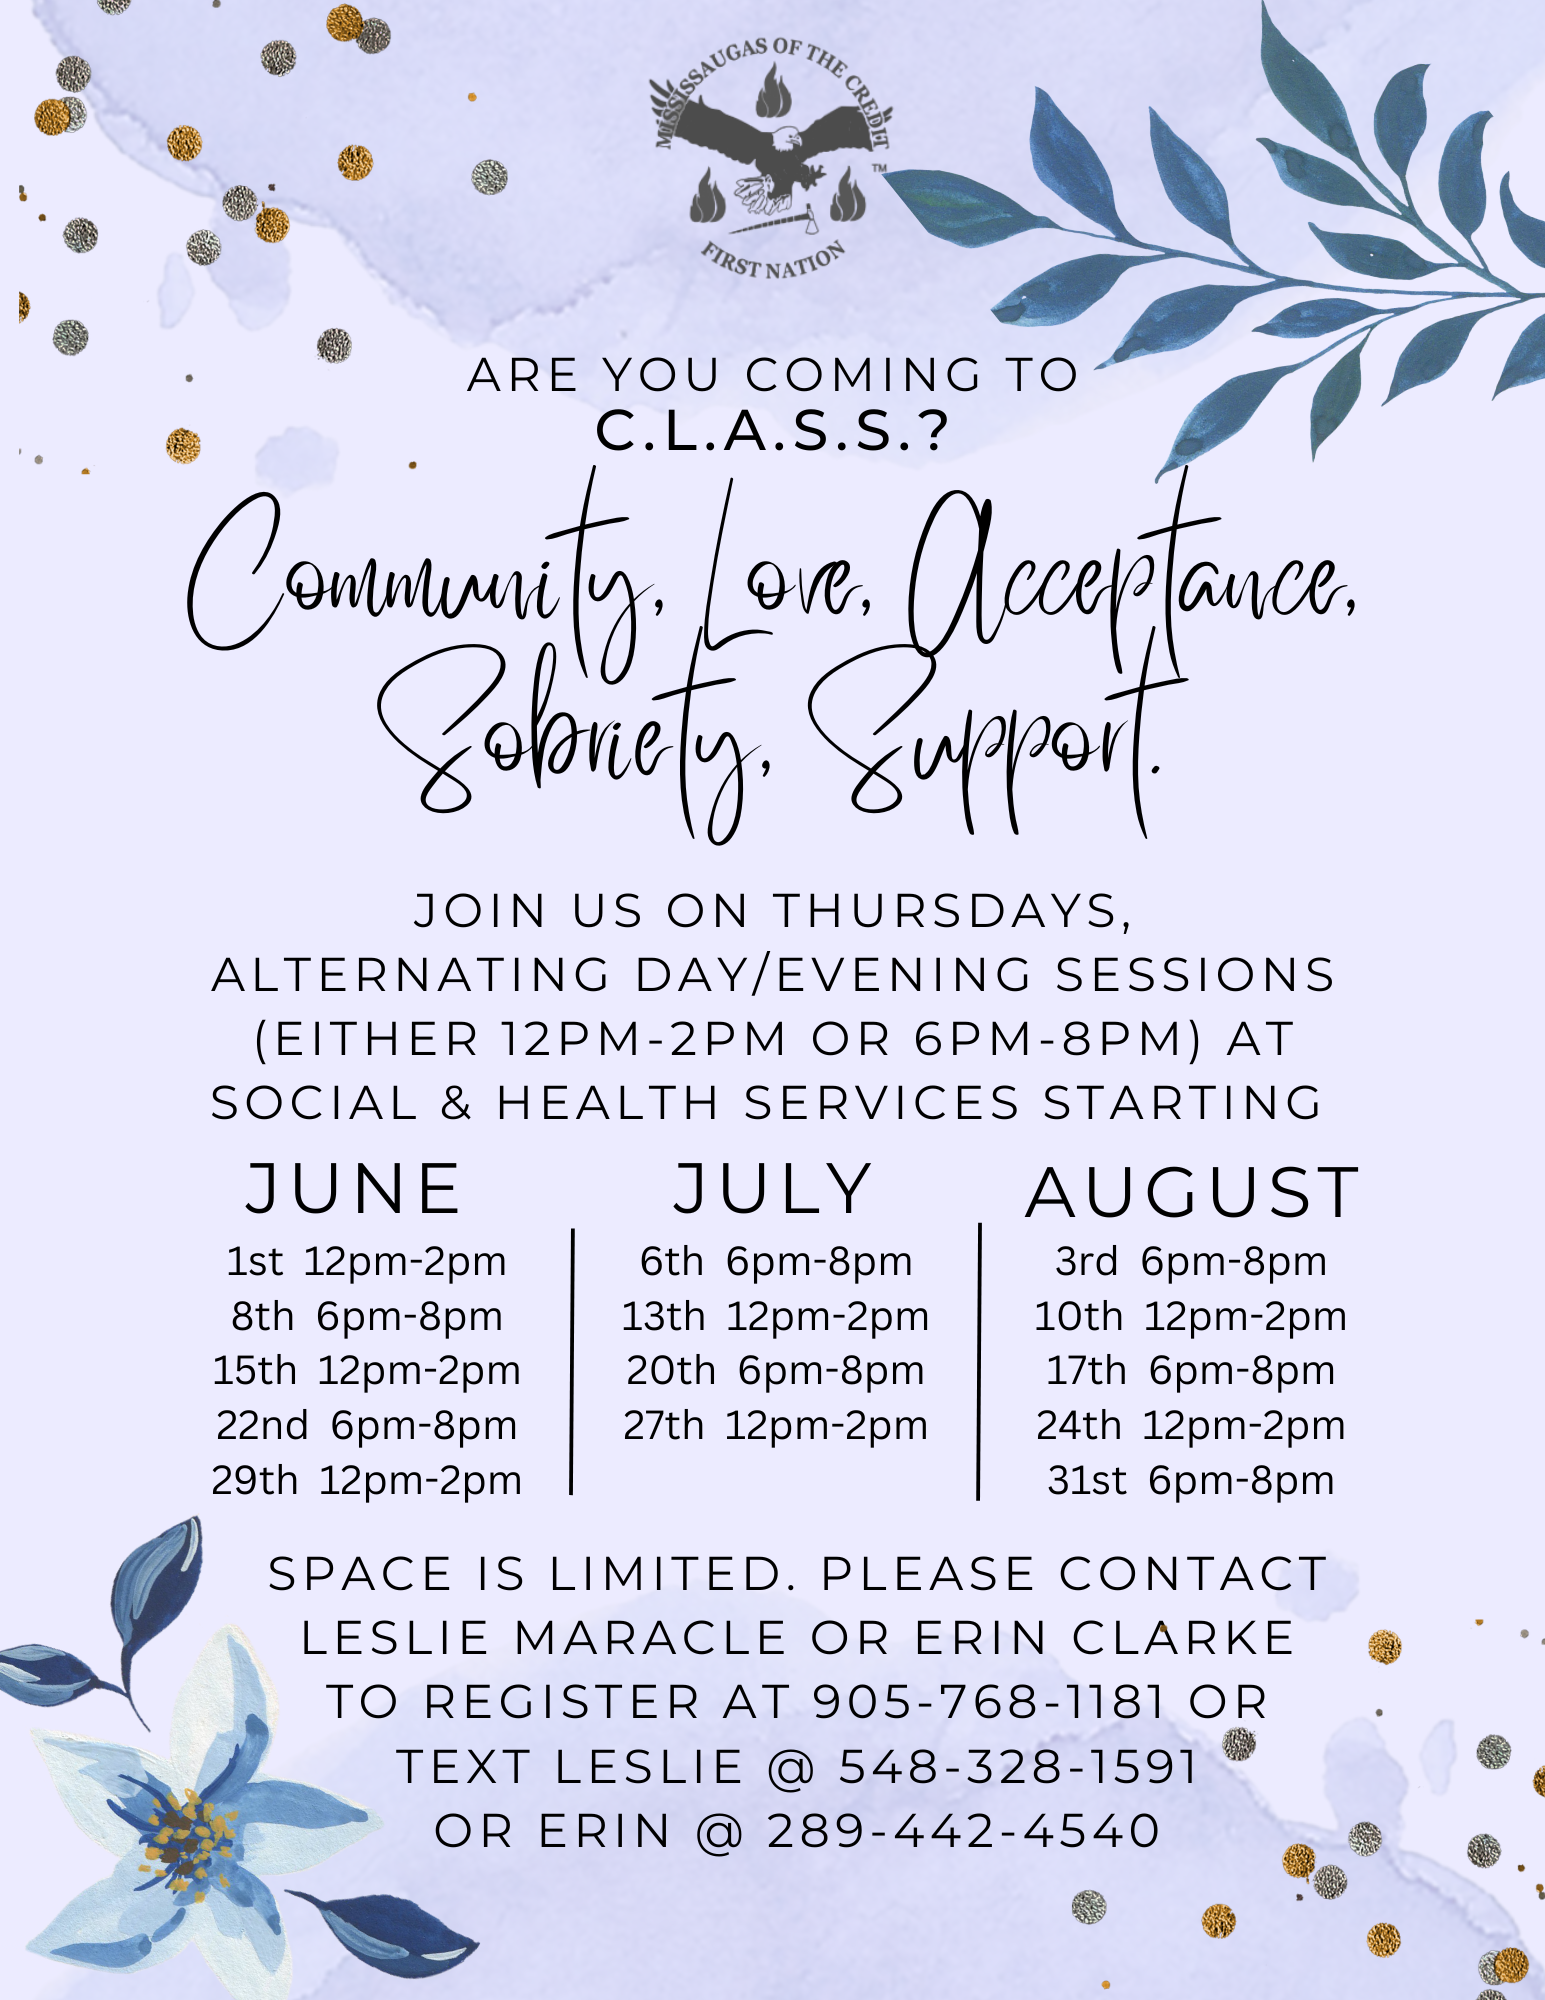 Community Love Acceptance Sobriety and Support summer schedule